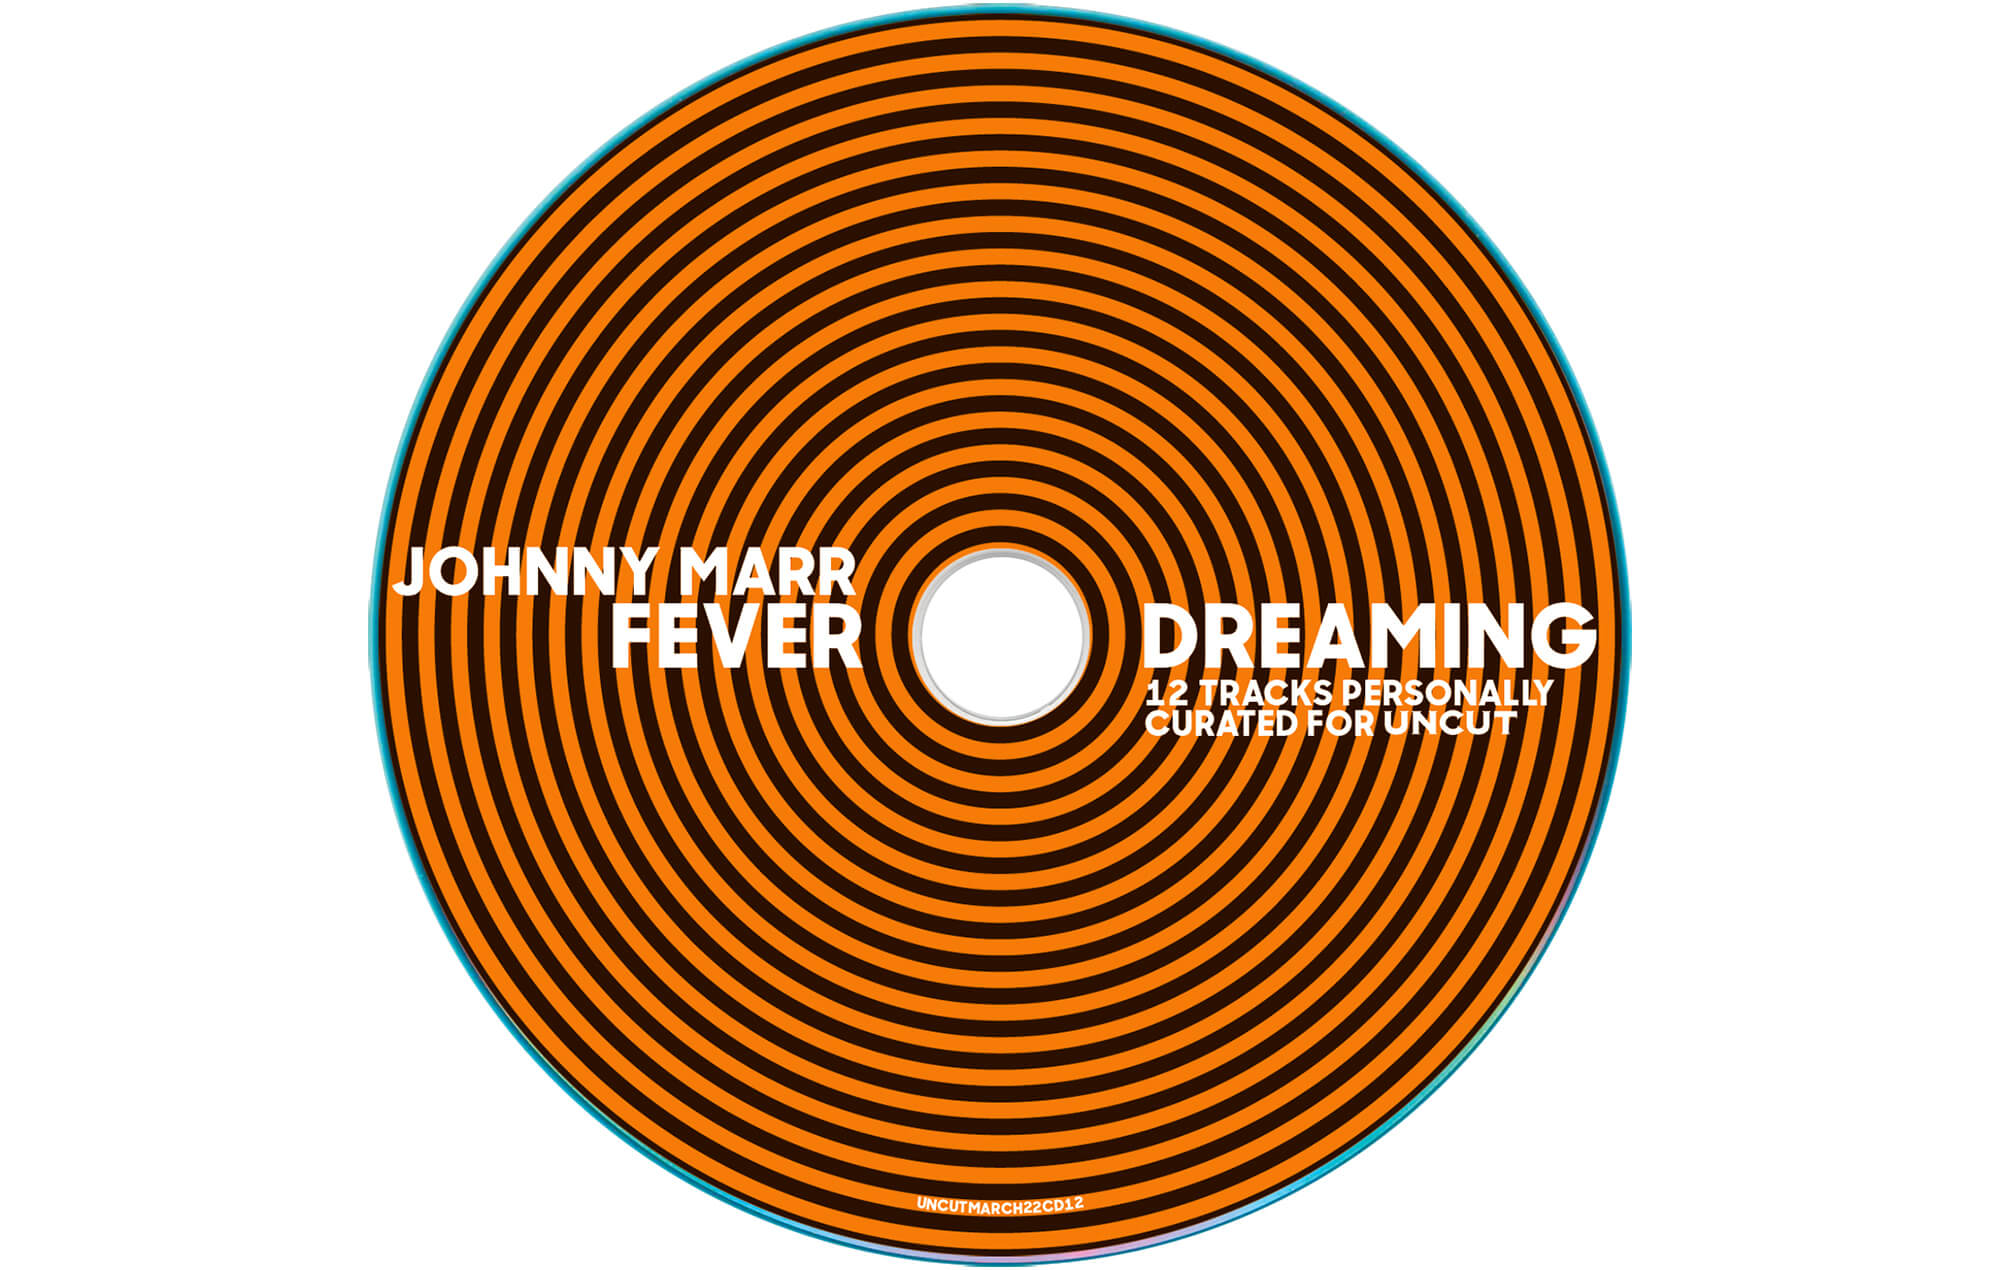 Fever Dreaming Johnny Marr free CD March 2022 issue